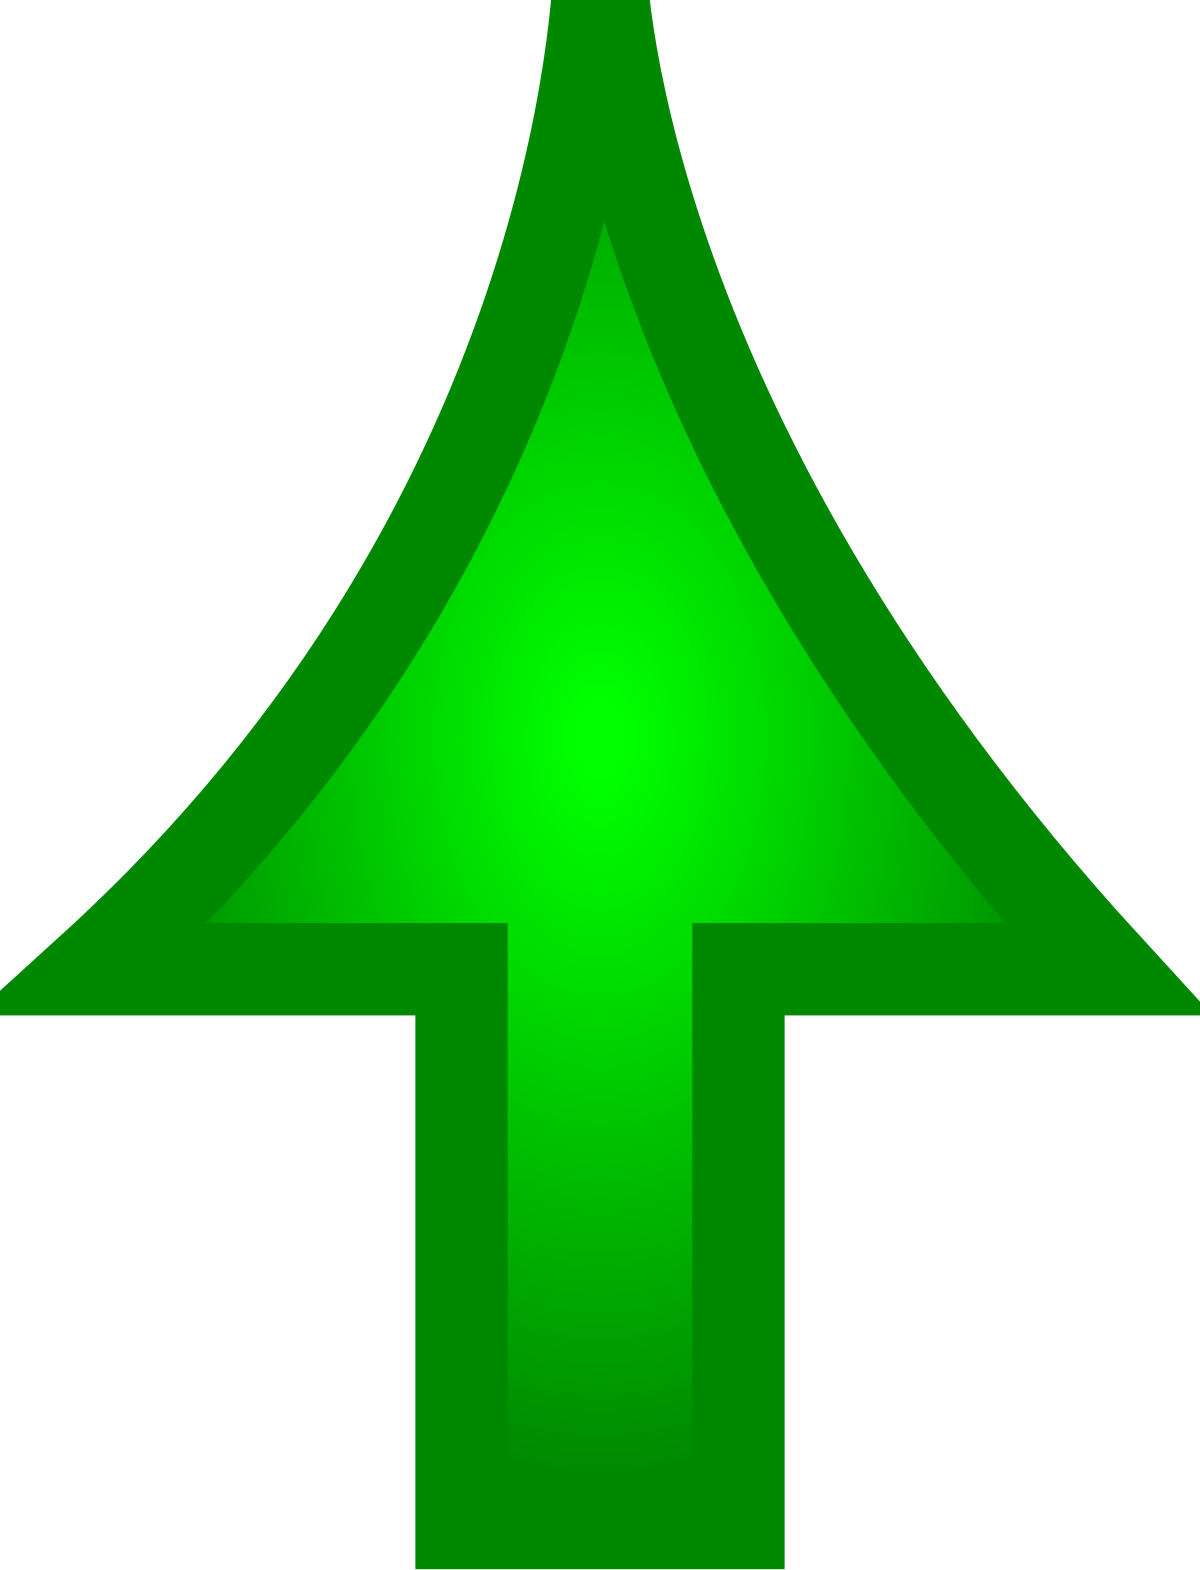 Download File:Arrow up green.svg - Wikimedia Commons